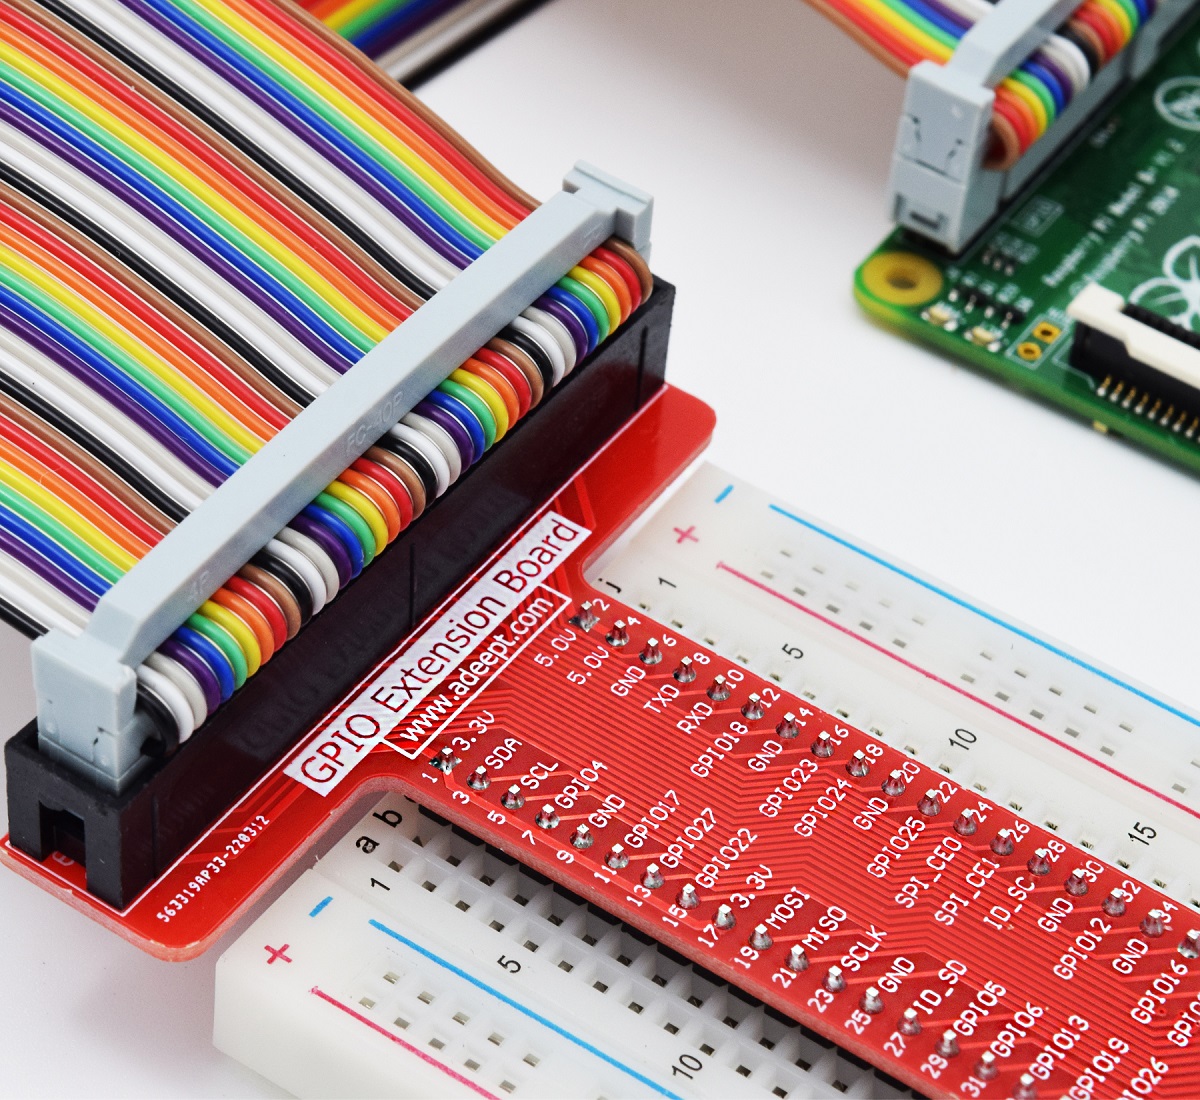 Adeept Raspberry Pi GPIO Breakout, T-Type GPIO Expansion Board +830 Points  Solderless Breadboard+65pcs Jumper Cables +40pin Rainbow Ribbon Cable, Rasp